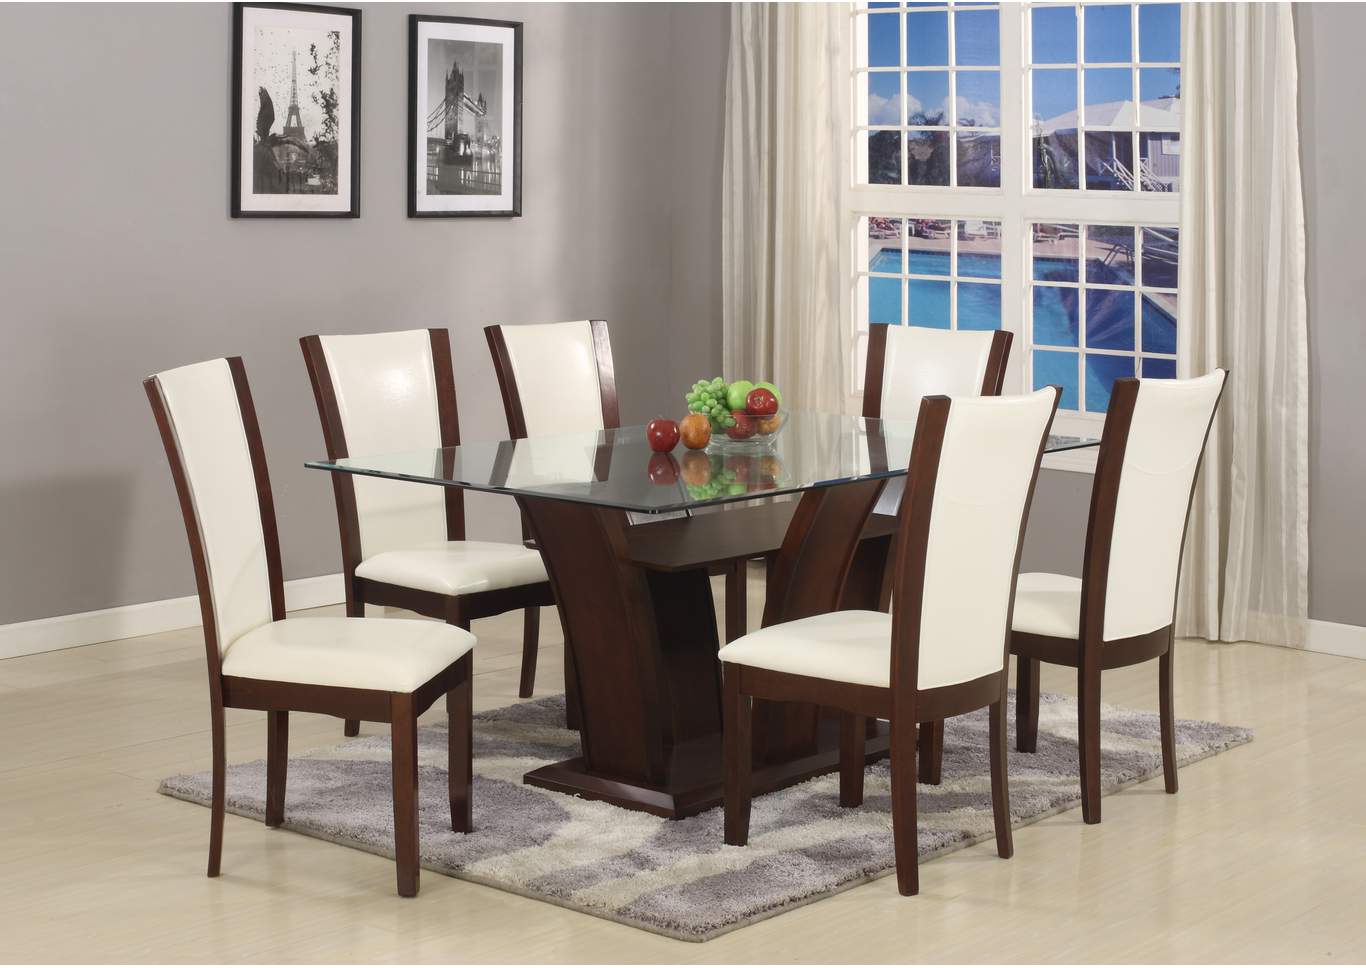 Camelia Rectangular Glass Top Dining Room Table w/6 White Side Chairs,Crown Mark